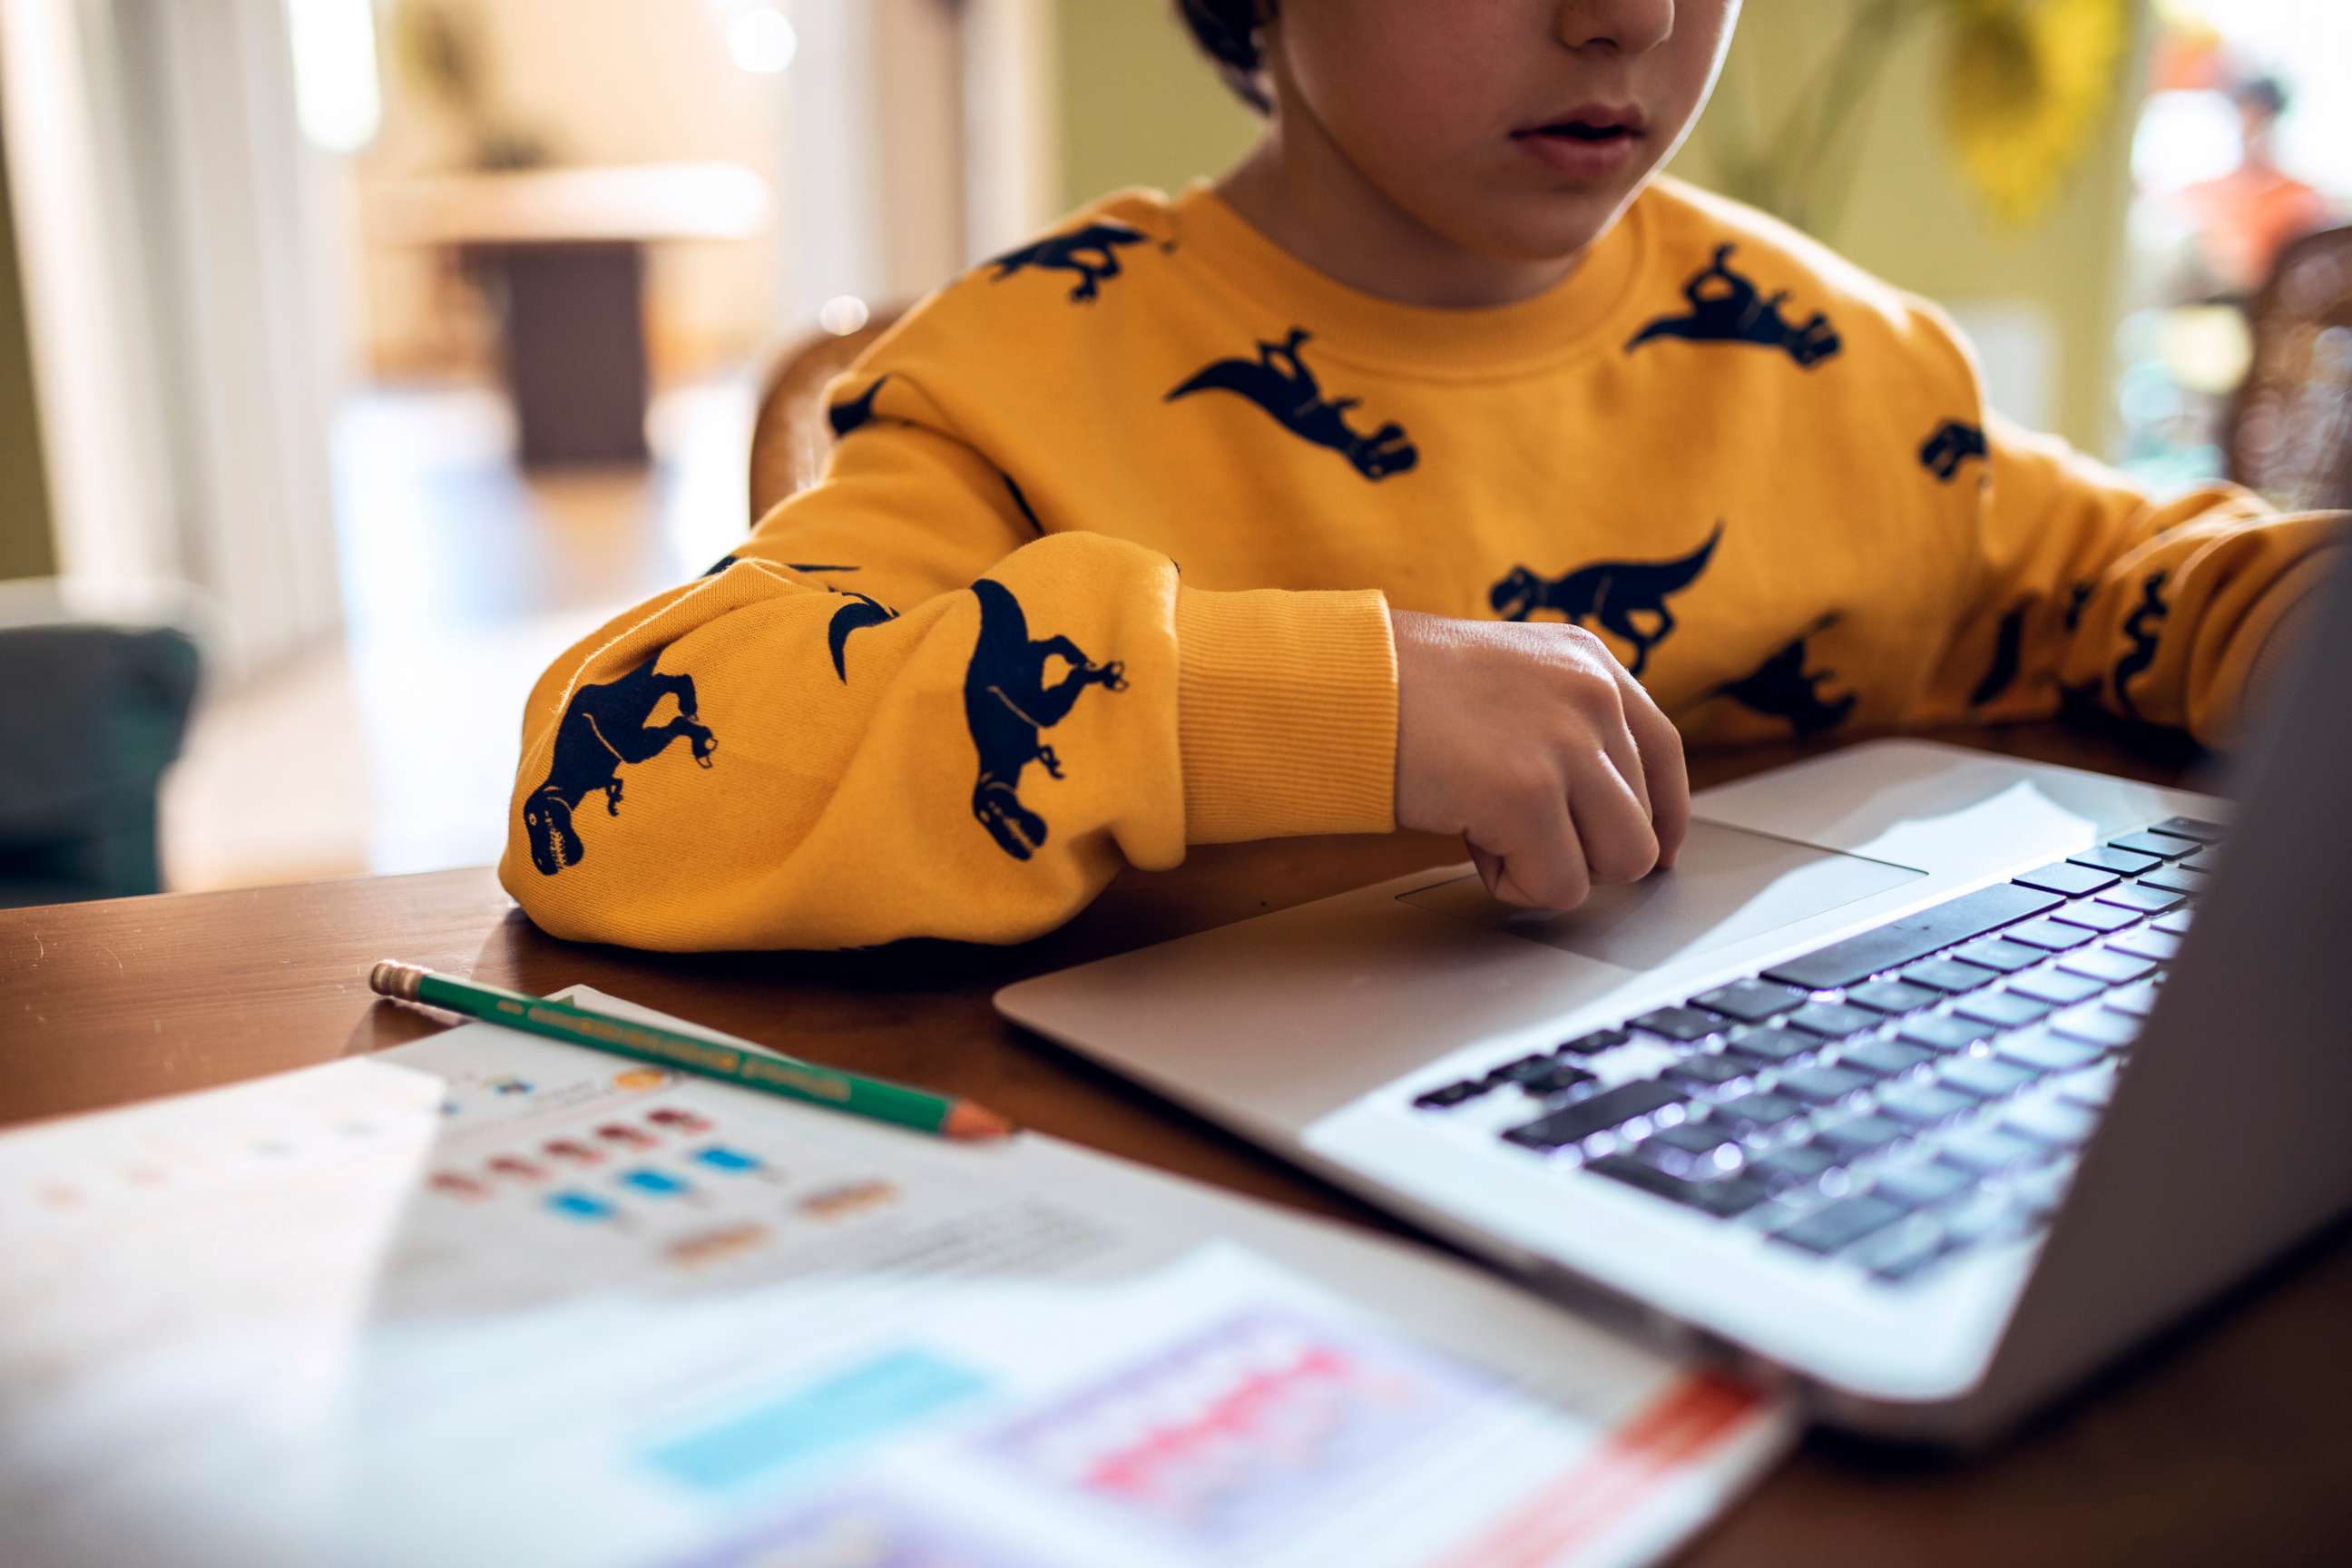 PHOTO: A child uses a laptop while remote learning in this stock photo.